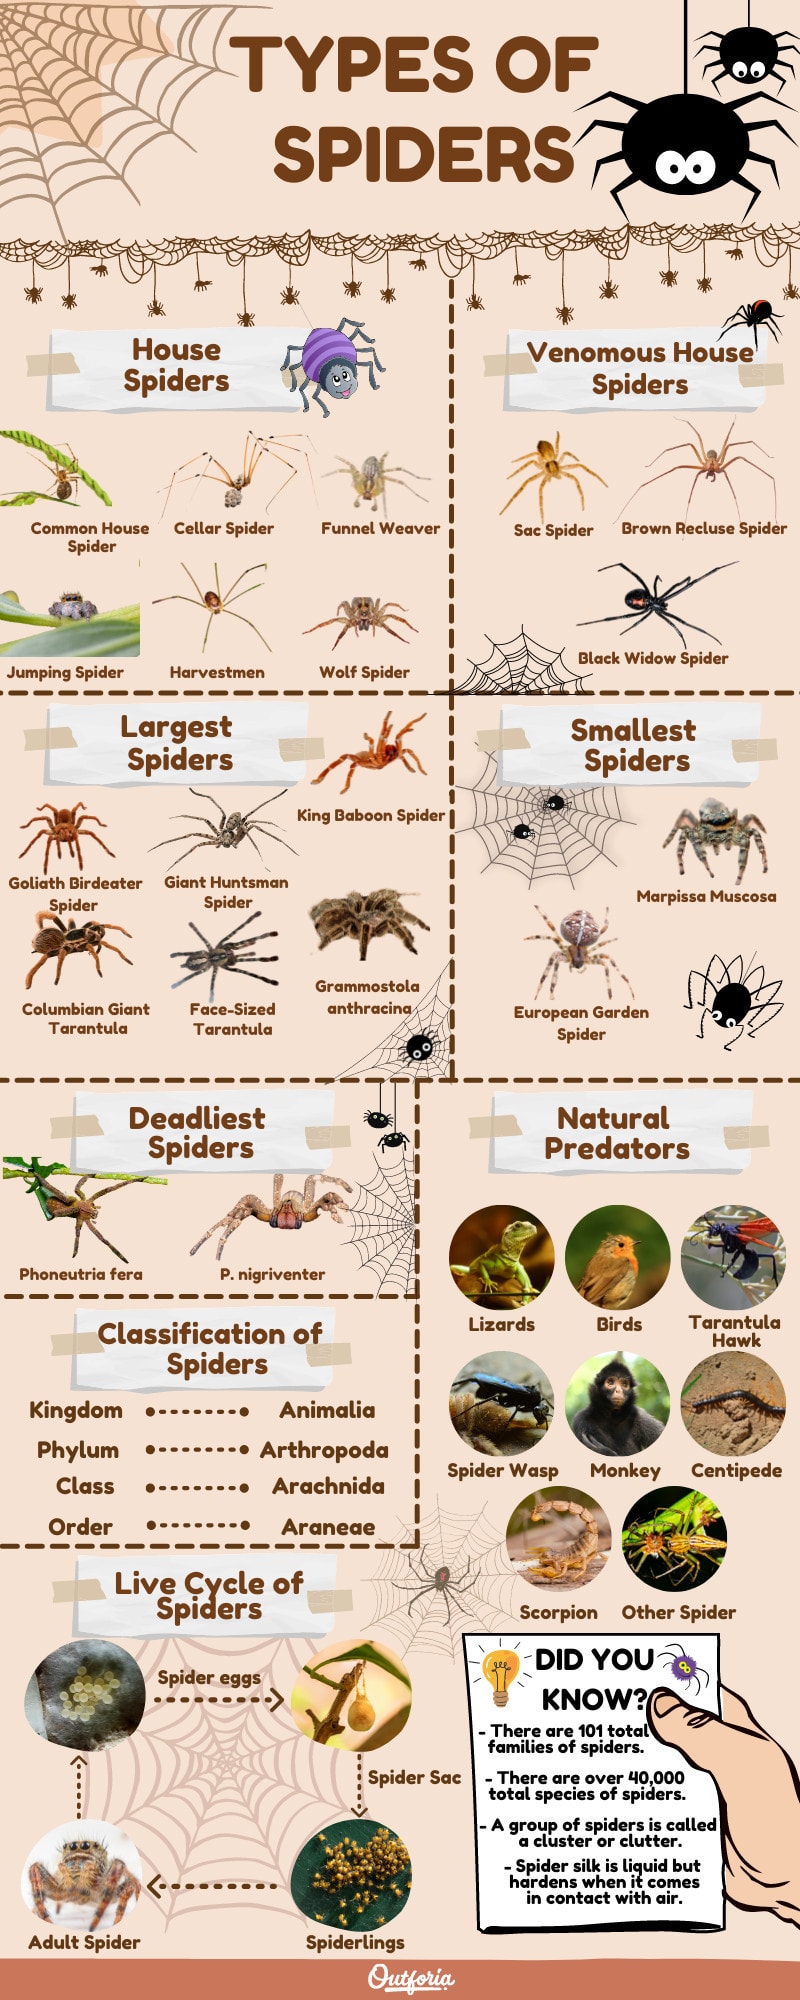 types of spiders infographic